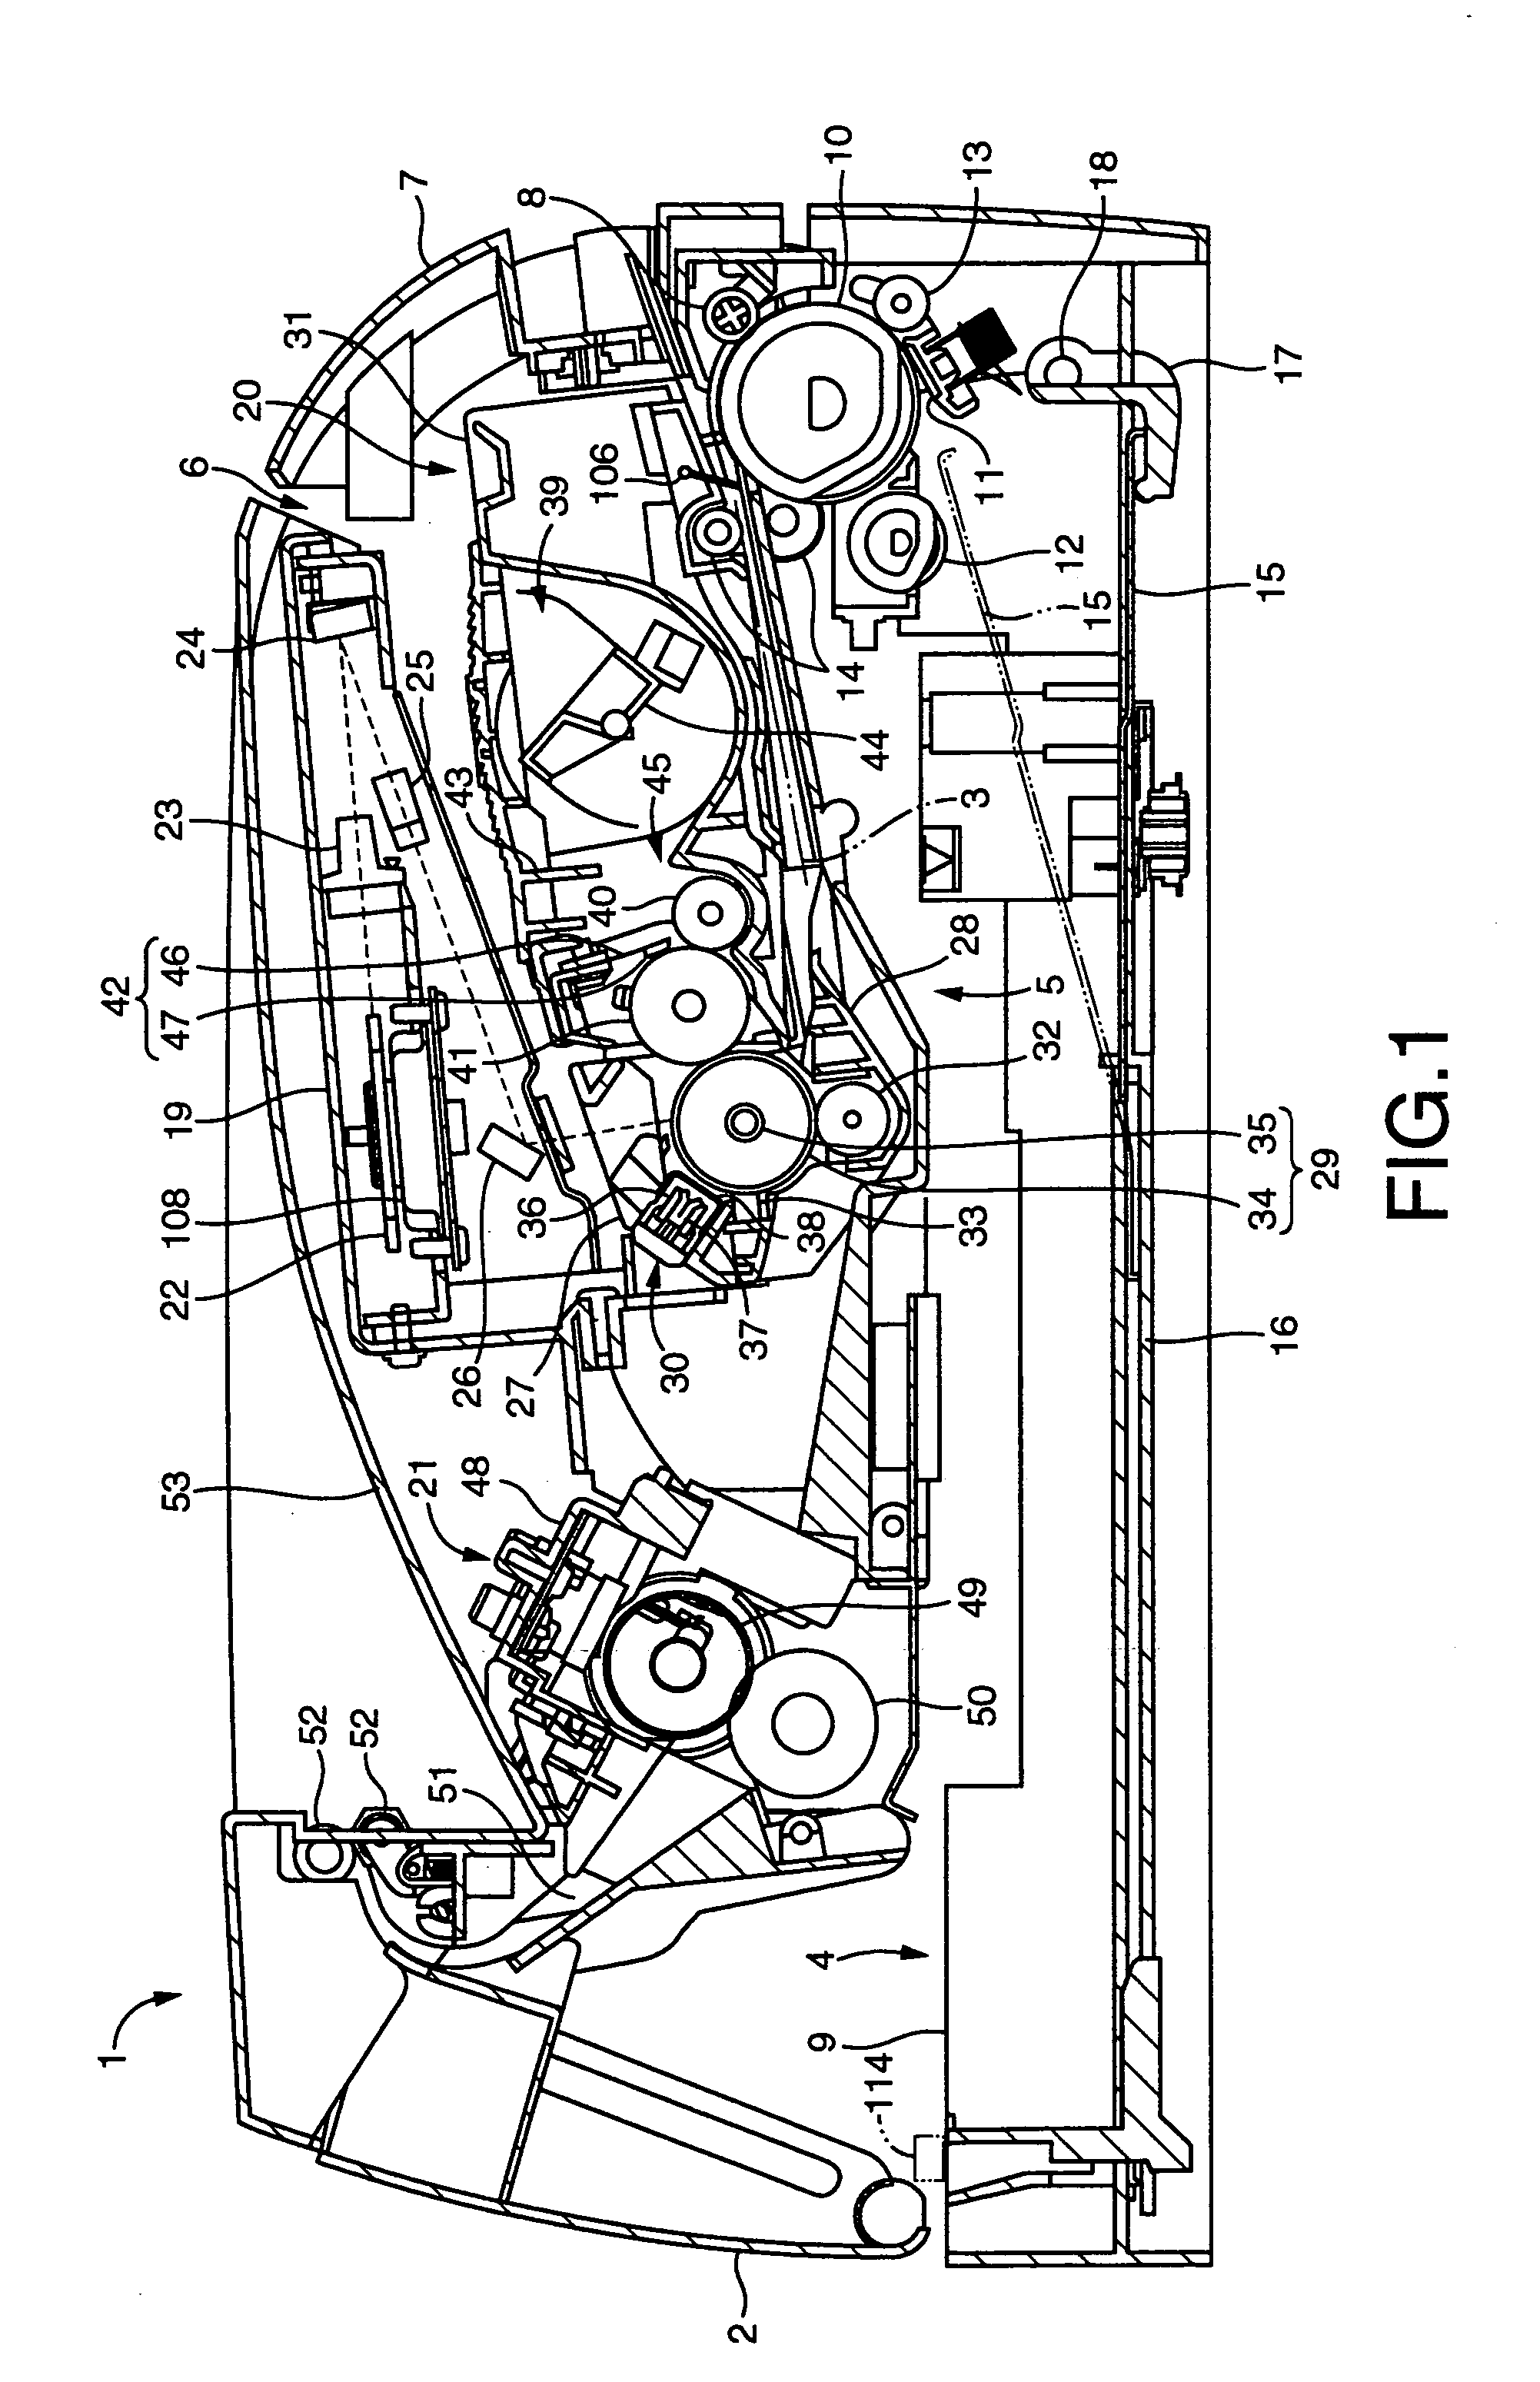 Image forming apparatus with recording medium support member adjustable in position for desired position of uppermost recording medium on support member